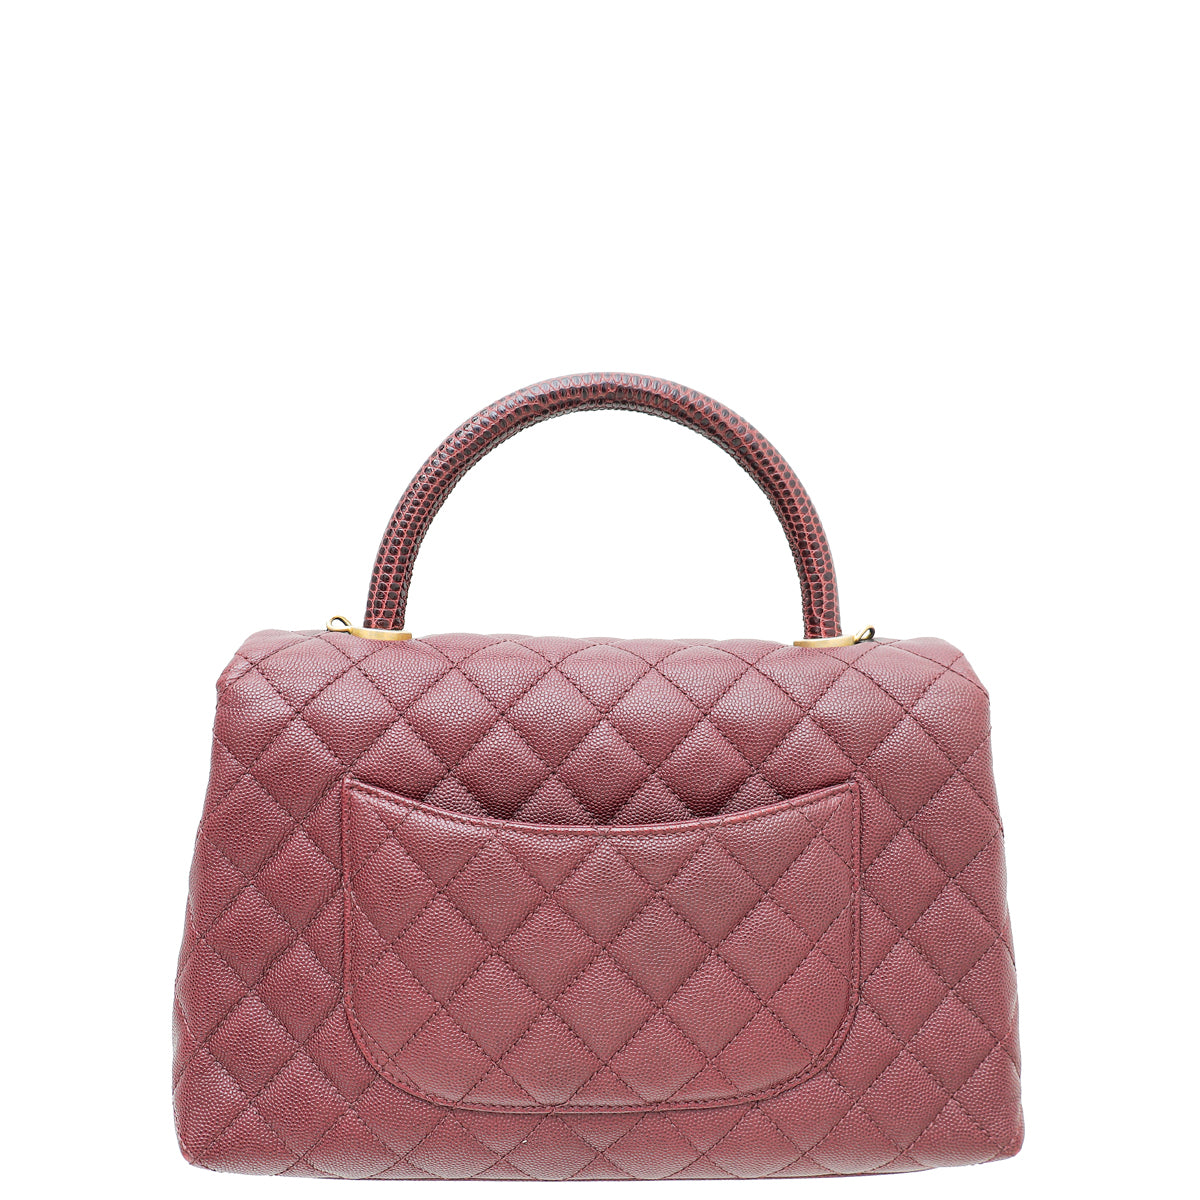 Chanel Burgundy CC Coco Handle with Lizard Handle Small Bag – The